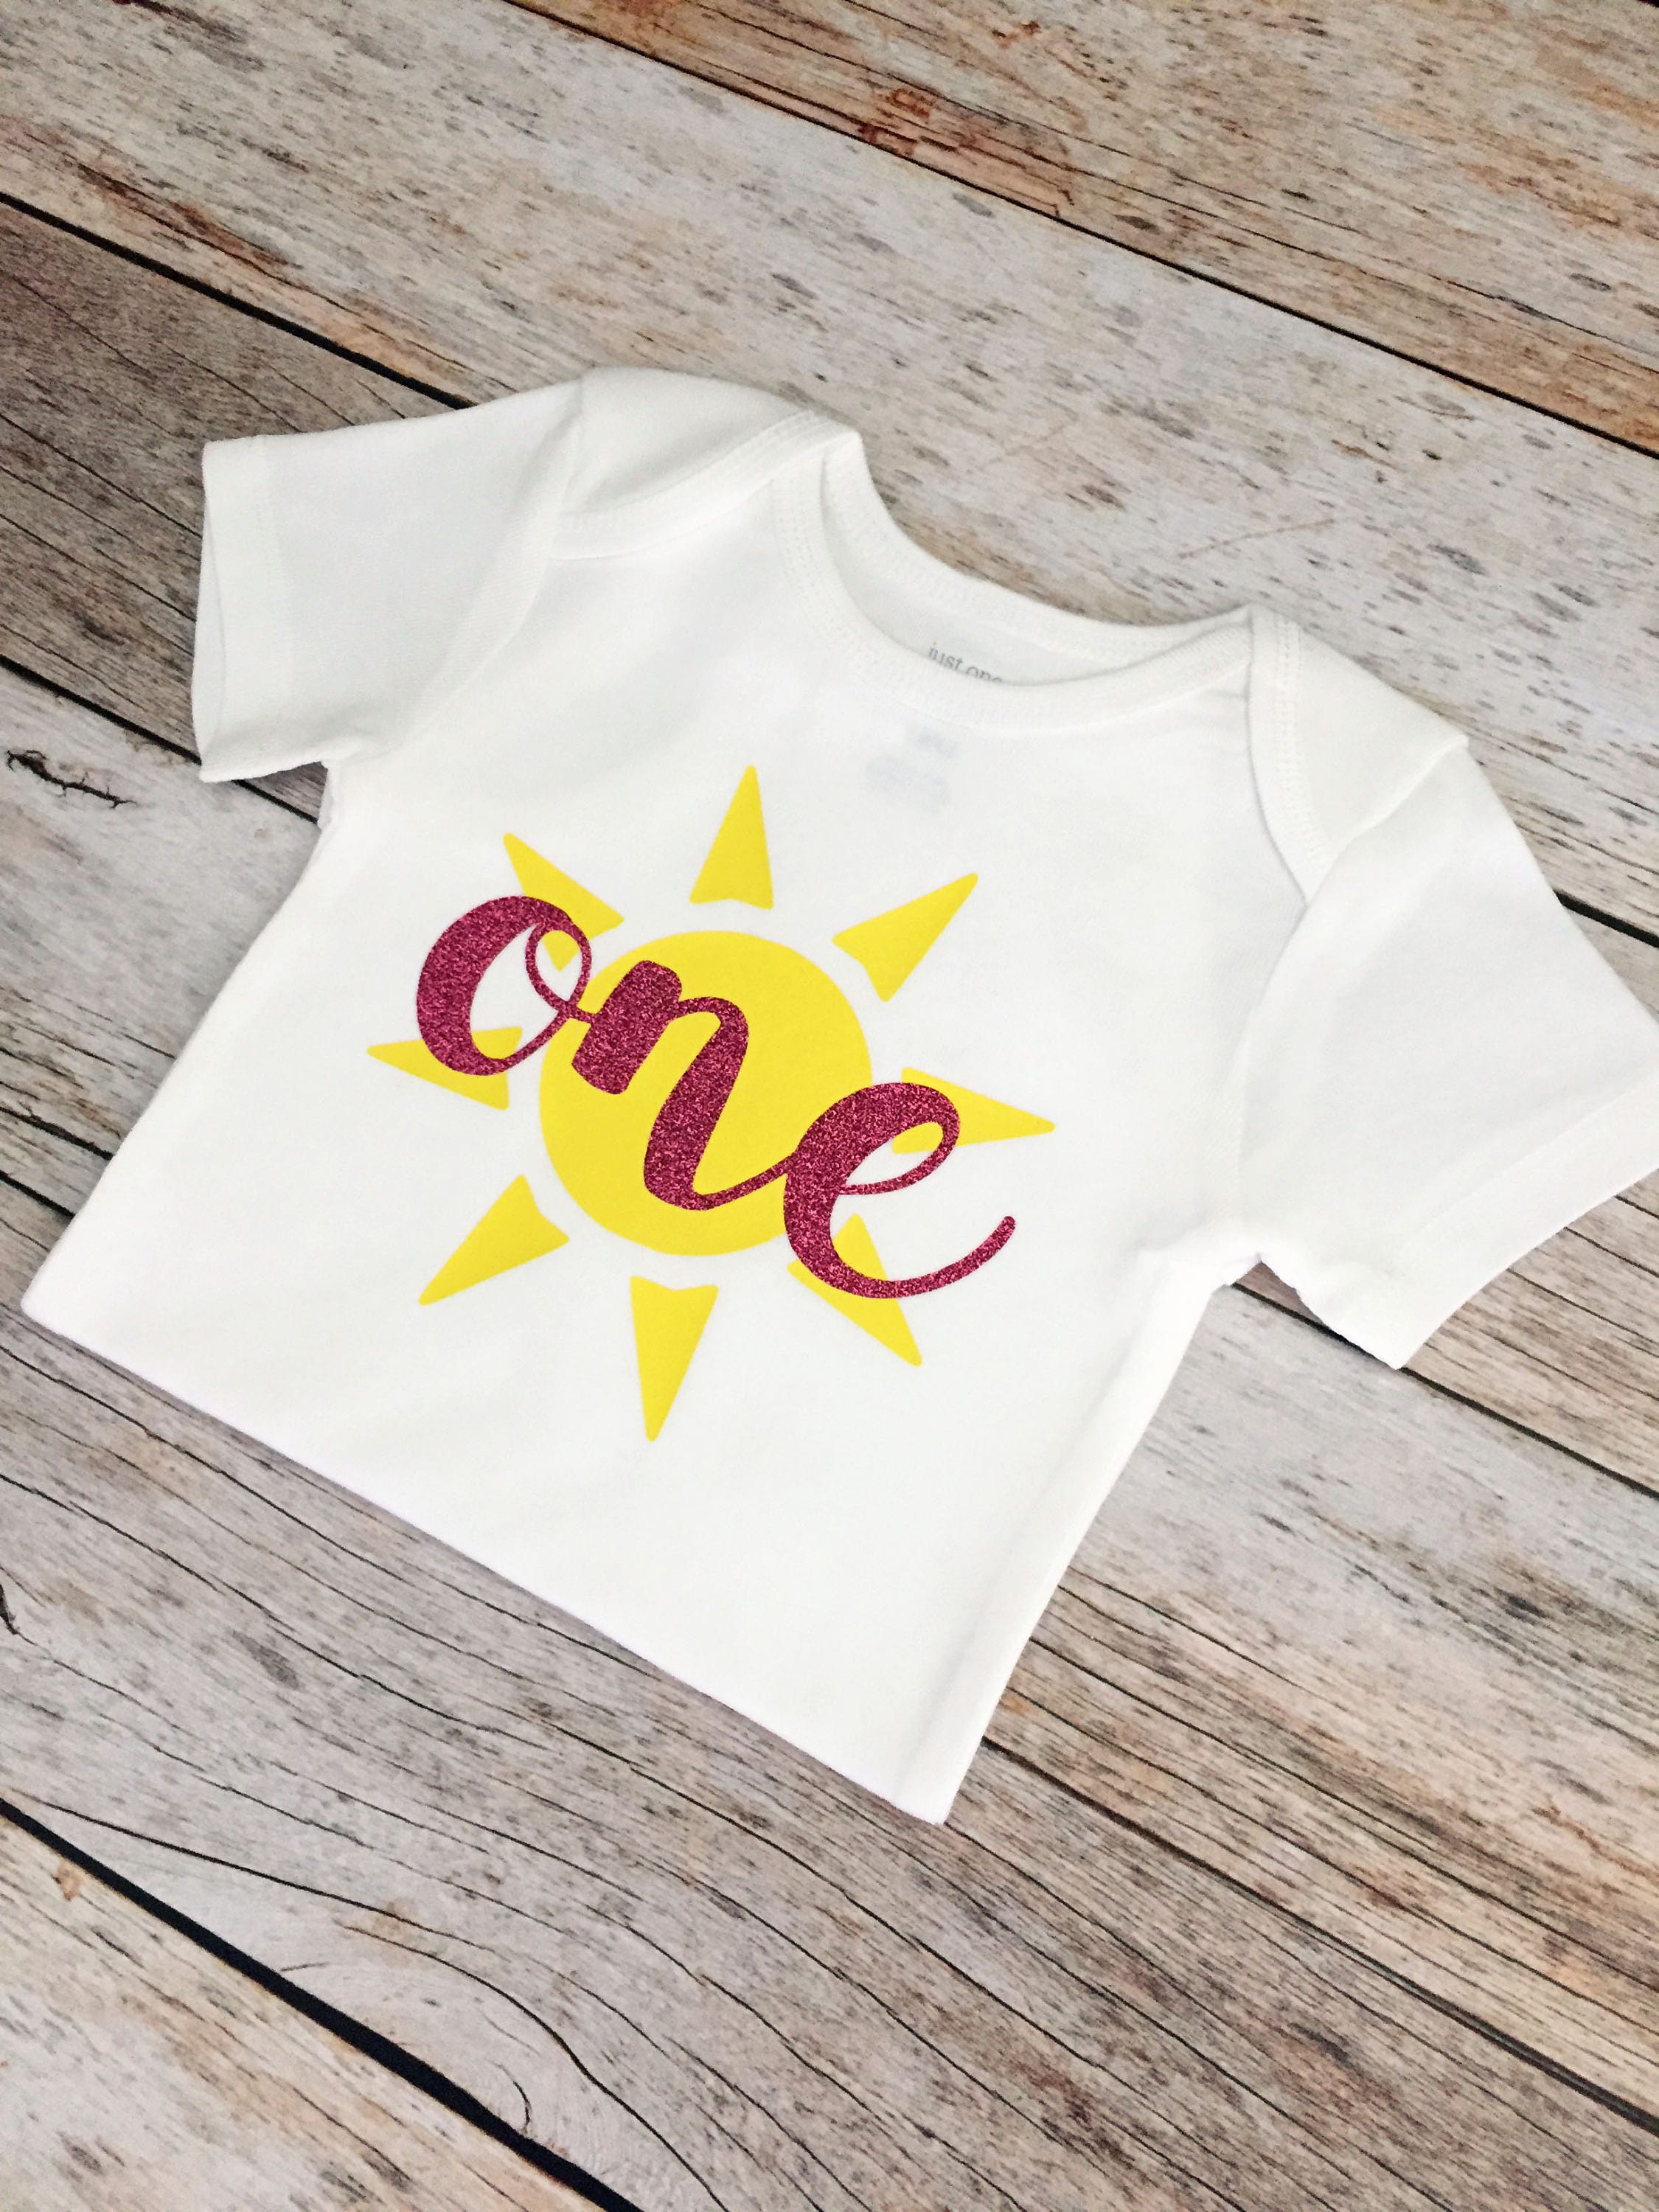 Pink and Yellow Sunshine First Birthday Shirt colors | Etsy